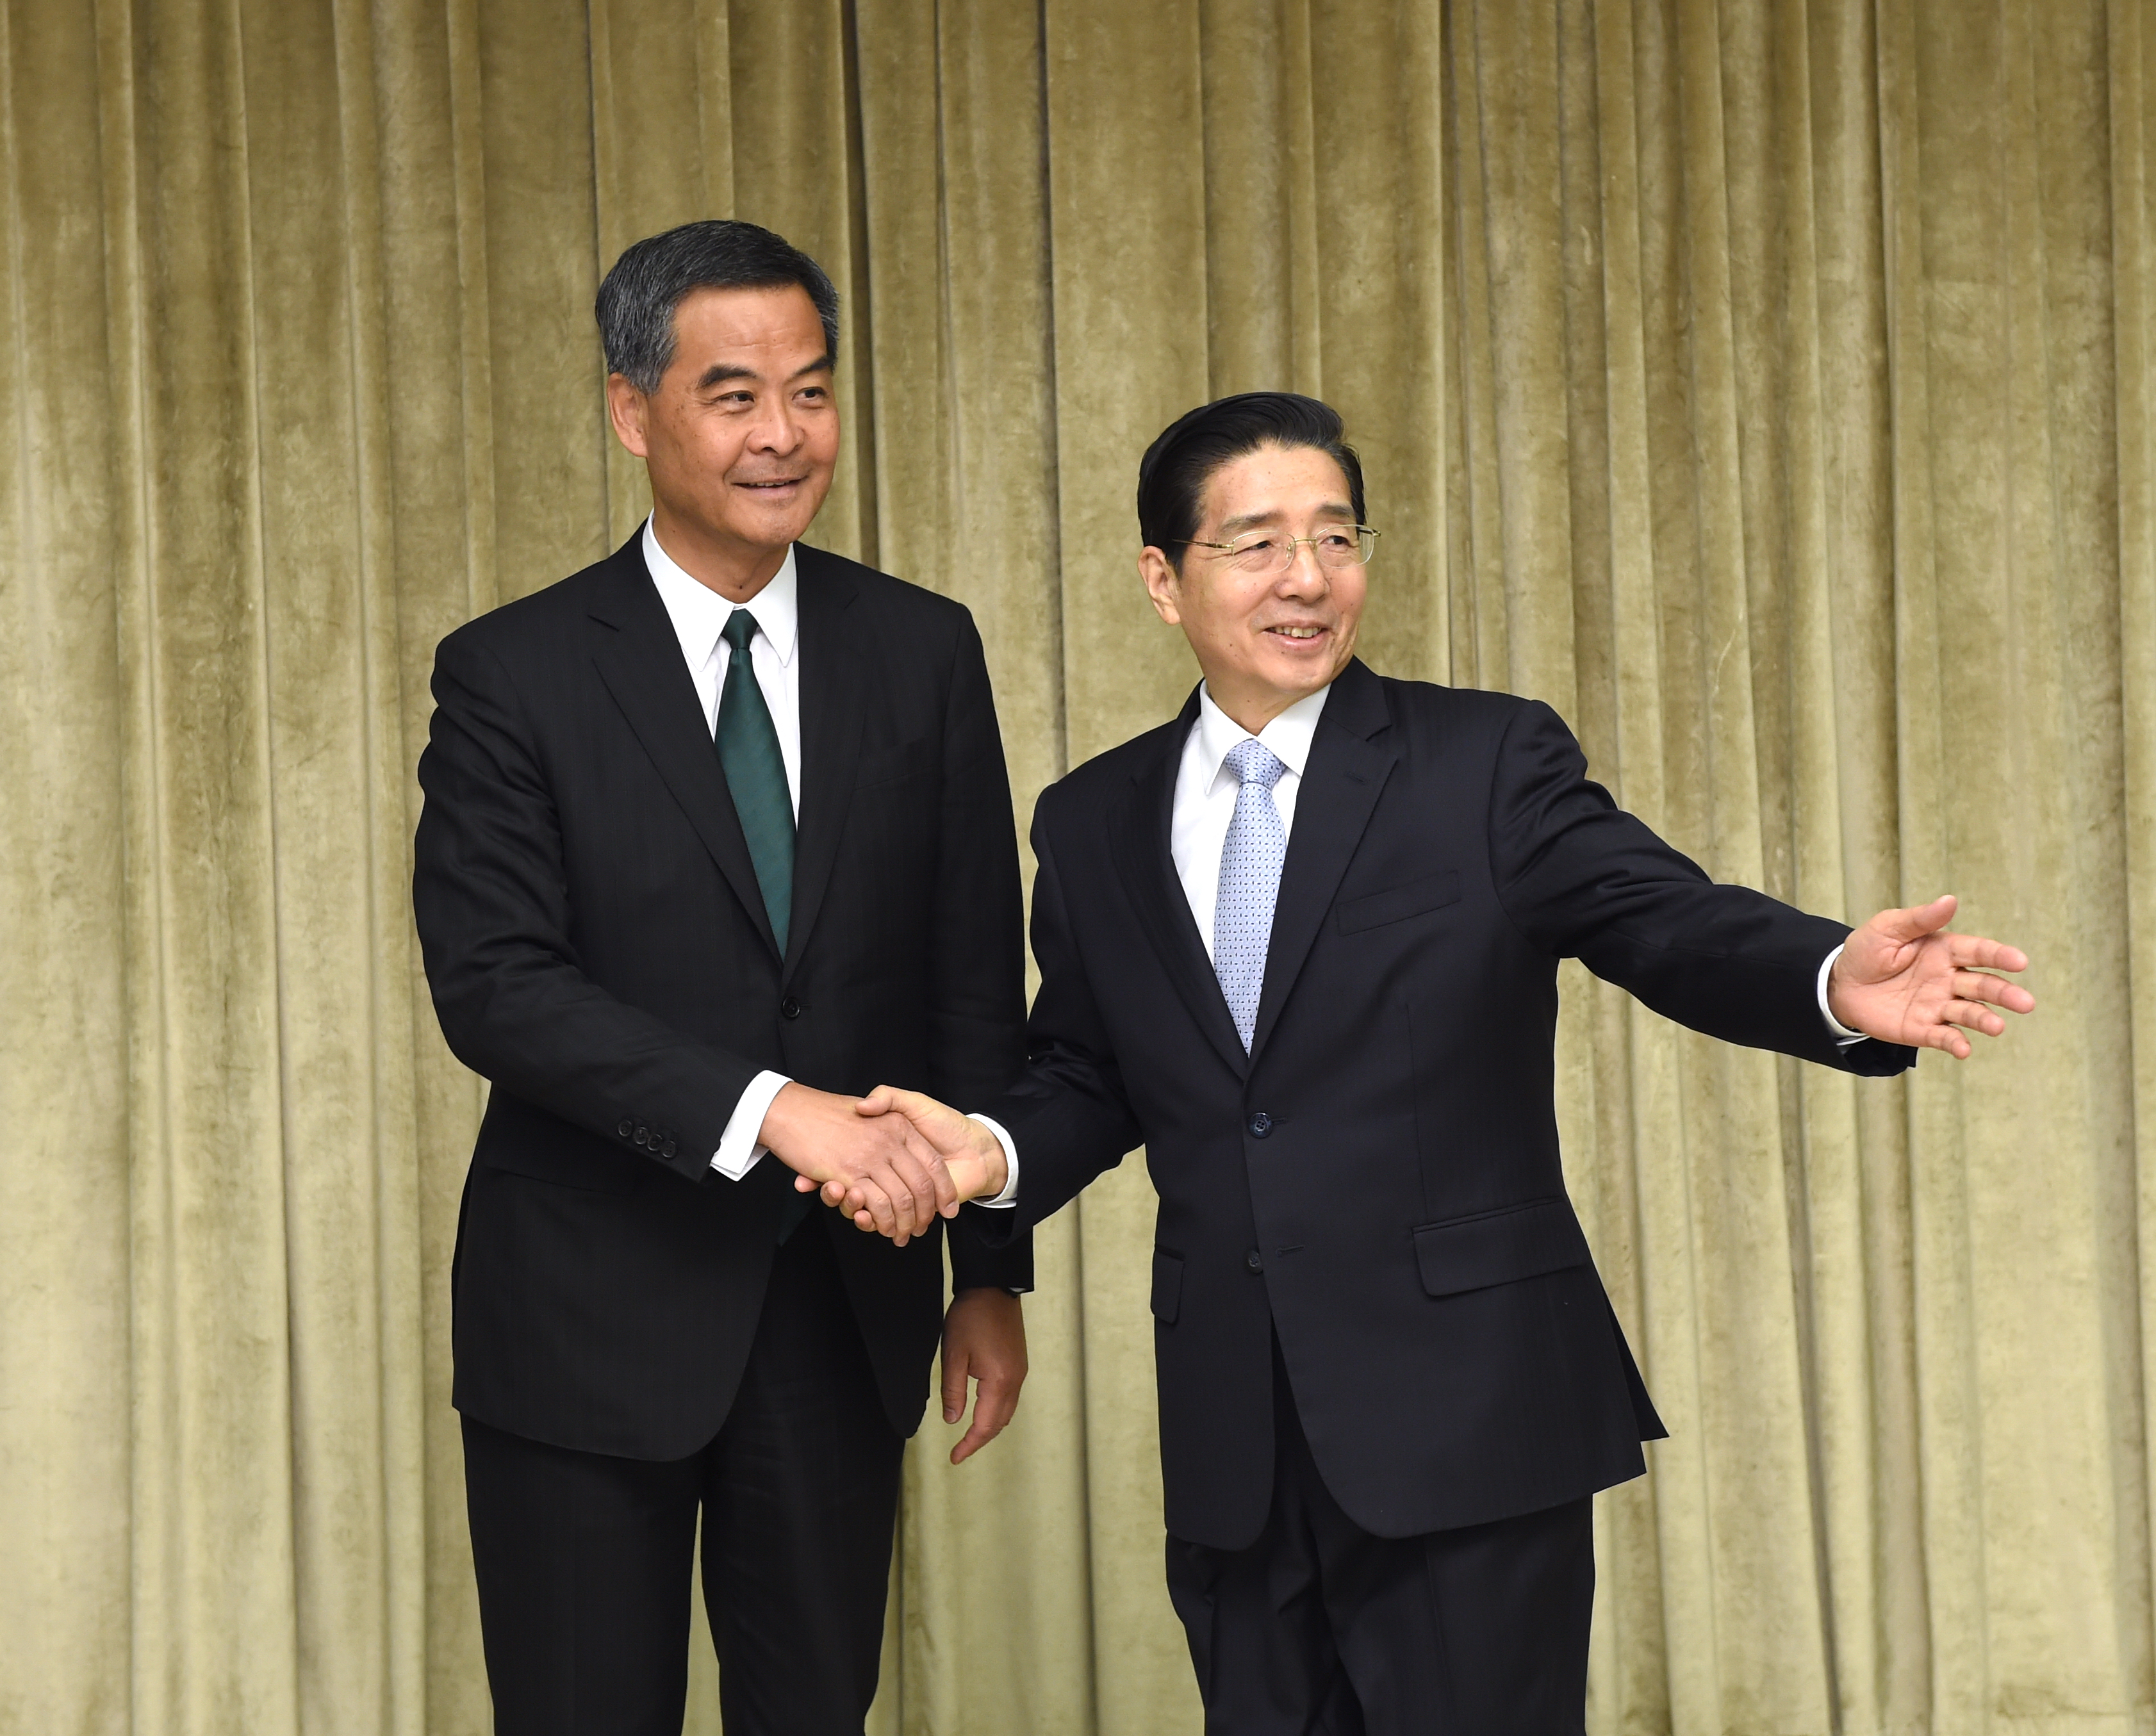 Leung Chun-ying meets with Public Security Minister Guo Shengkun at the annual sessions in Beijing. The chief executive appears to enjoy the full confidence of the central government. Photo: Xinhua